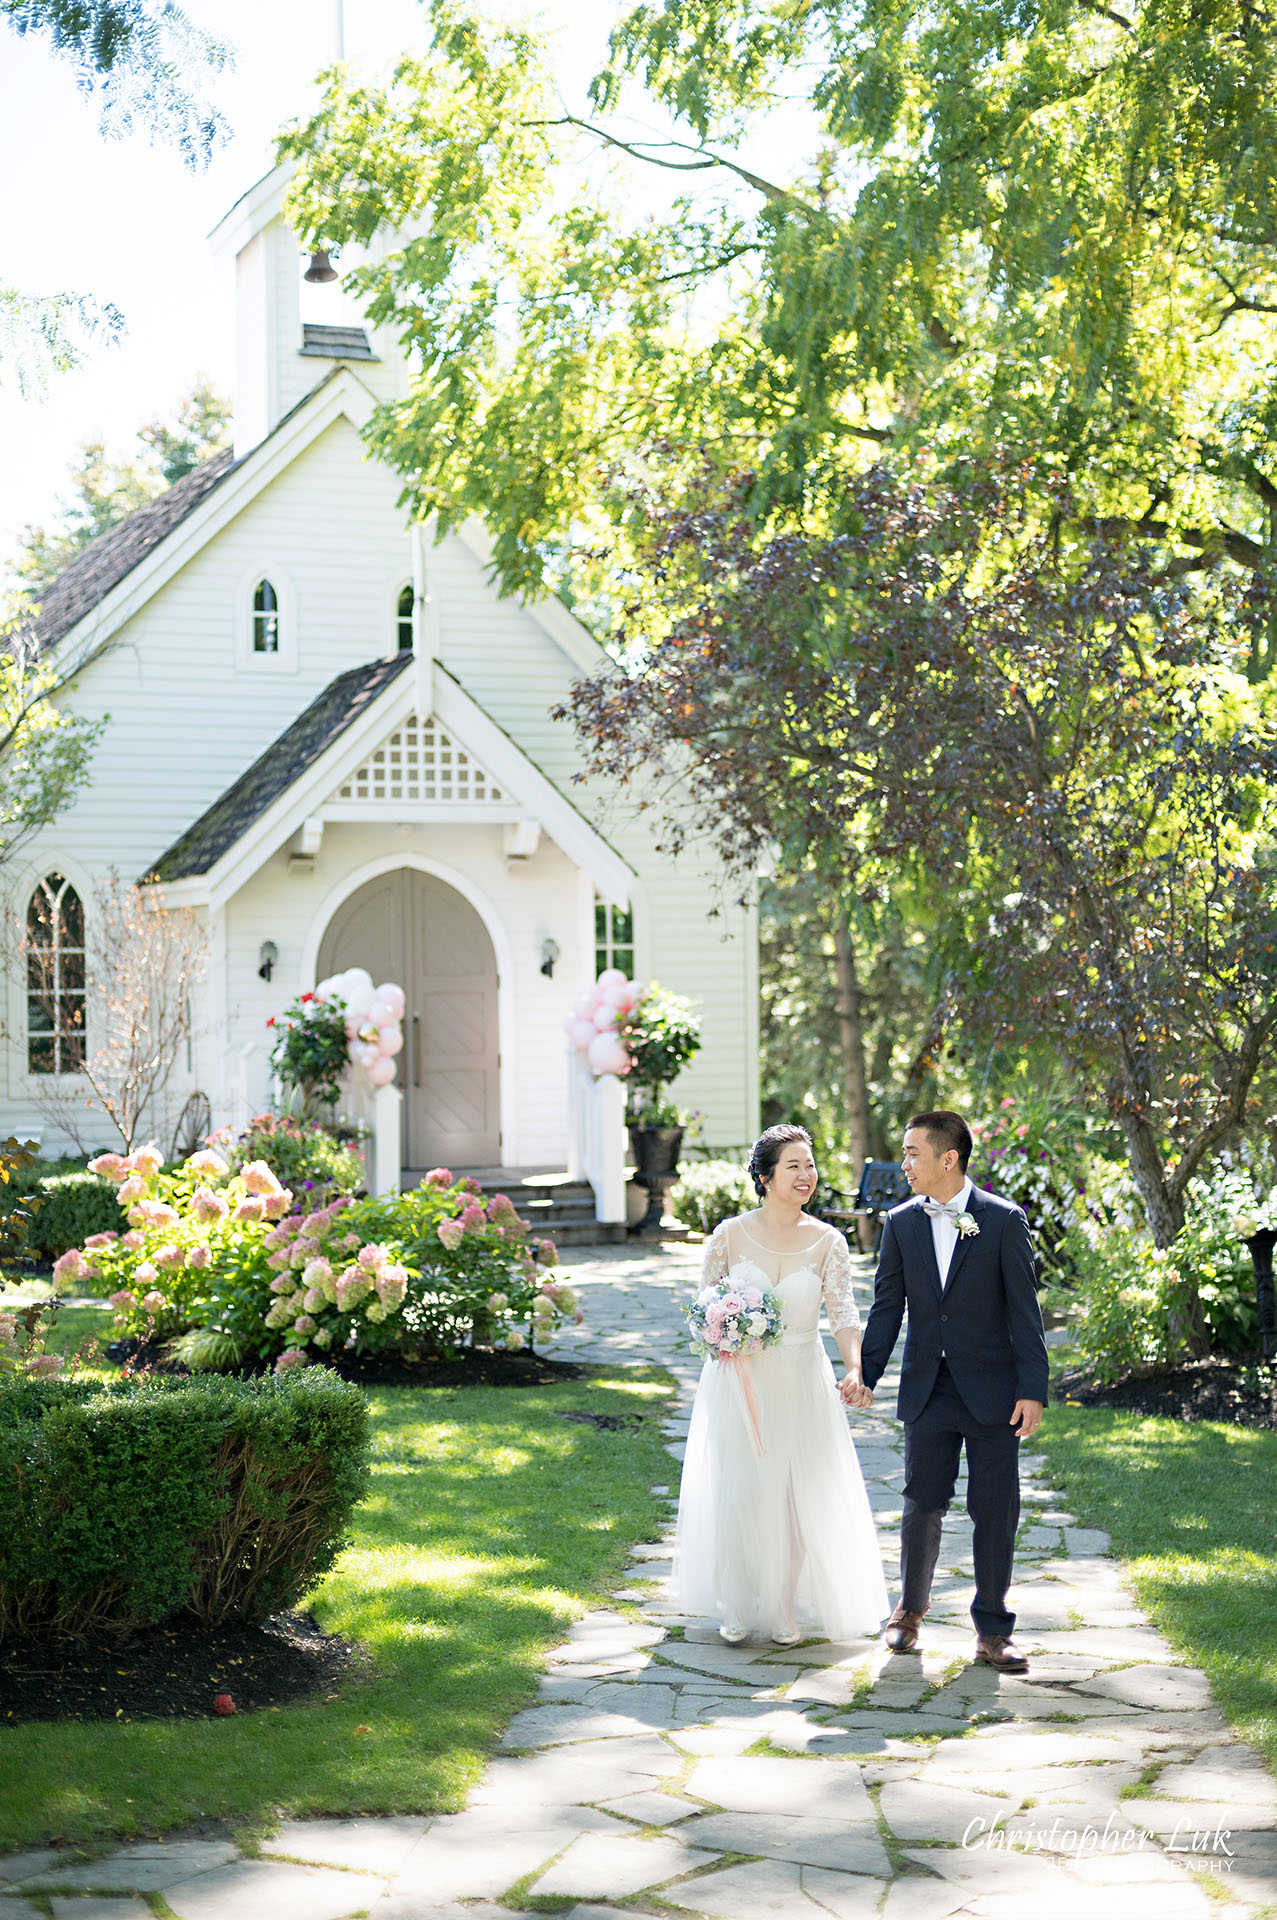 Christopher Luk Toronto Wedding Photographer The Doctor's House Chapel Kleinburg Natural Candid Photojournalistic Posed Bride Groom Garden Holding Hands Walking Together Portrait Micro Microwedding 